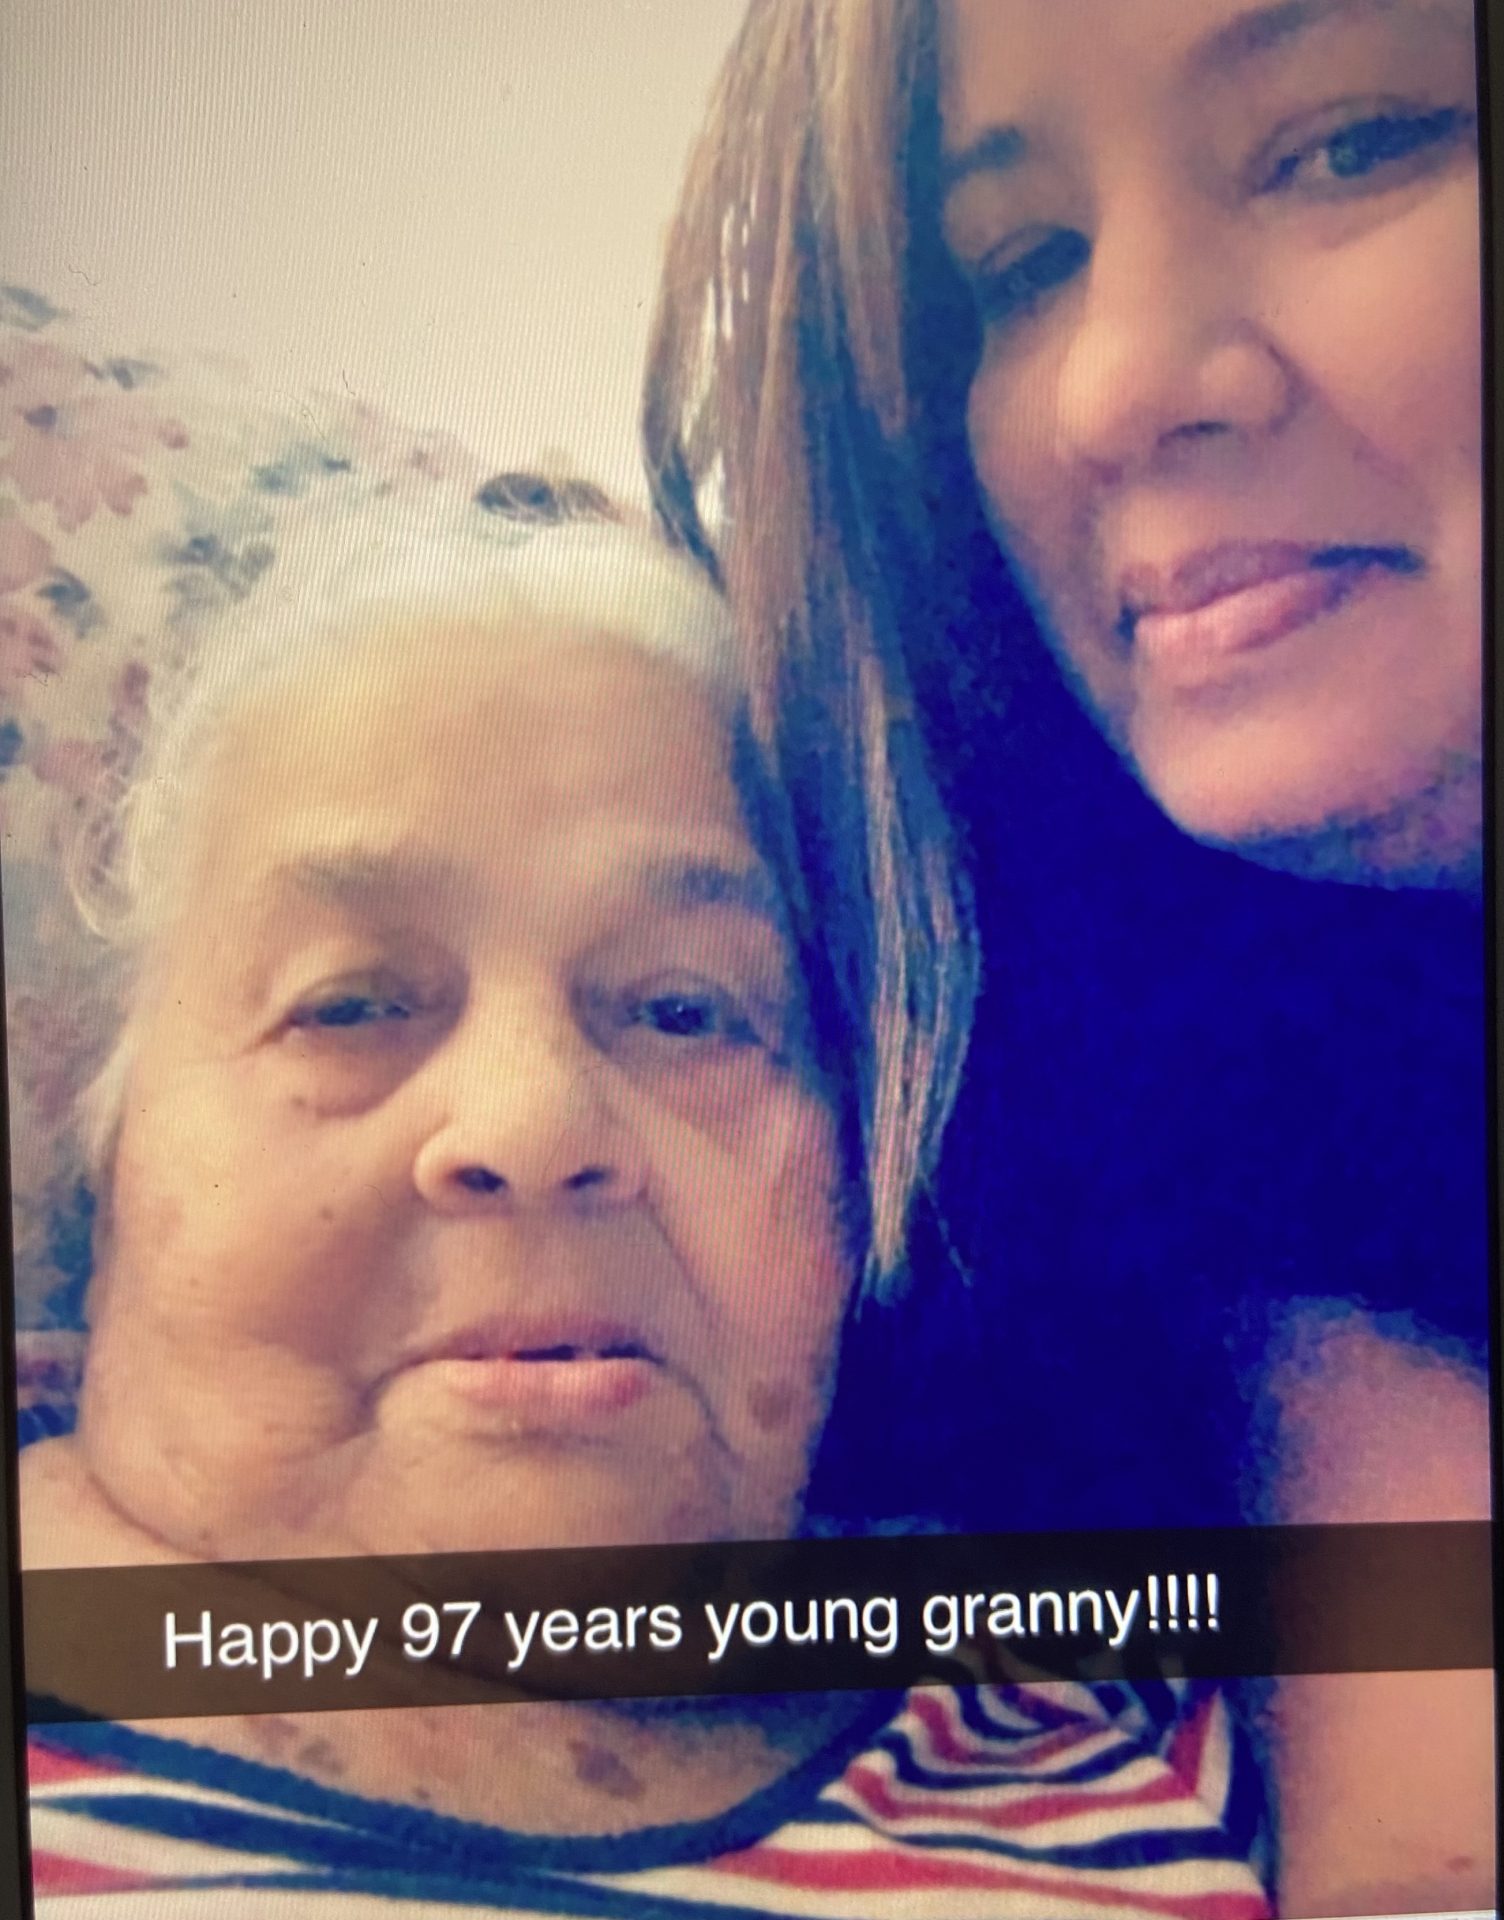 Grandma when I celebrated your 97th birthday, I never imagine that it would be the last one.. I miss you so much and I was so honor to be your granddaughter !!